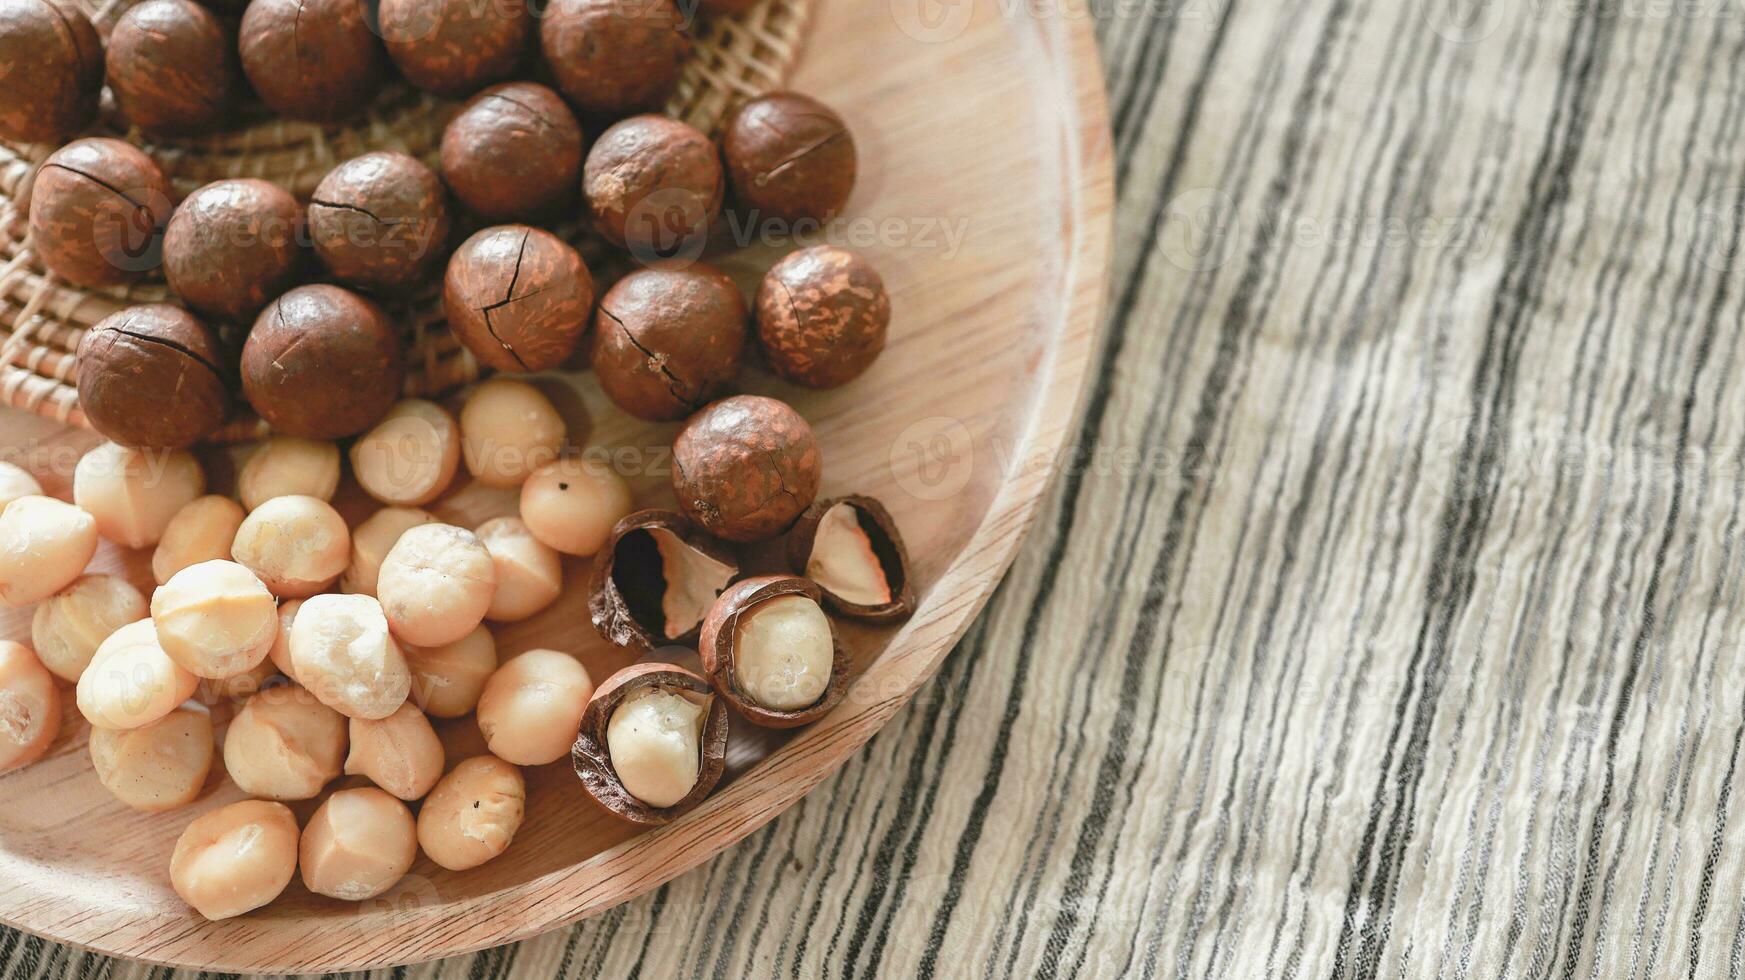 Organic Macadamia nut. macadamia nuts are cracked and baked to taste extremely delicious superfood fresh natural shelled unsalted raw macadamia and healthy food concept photo